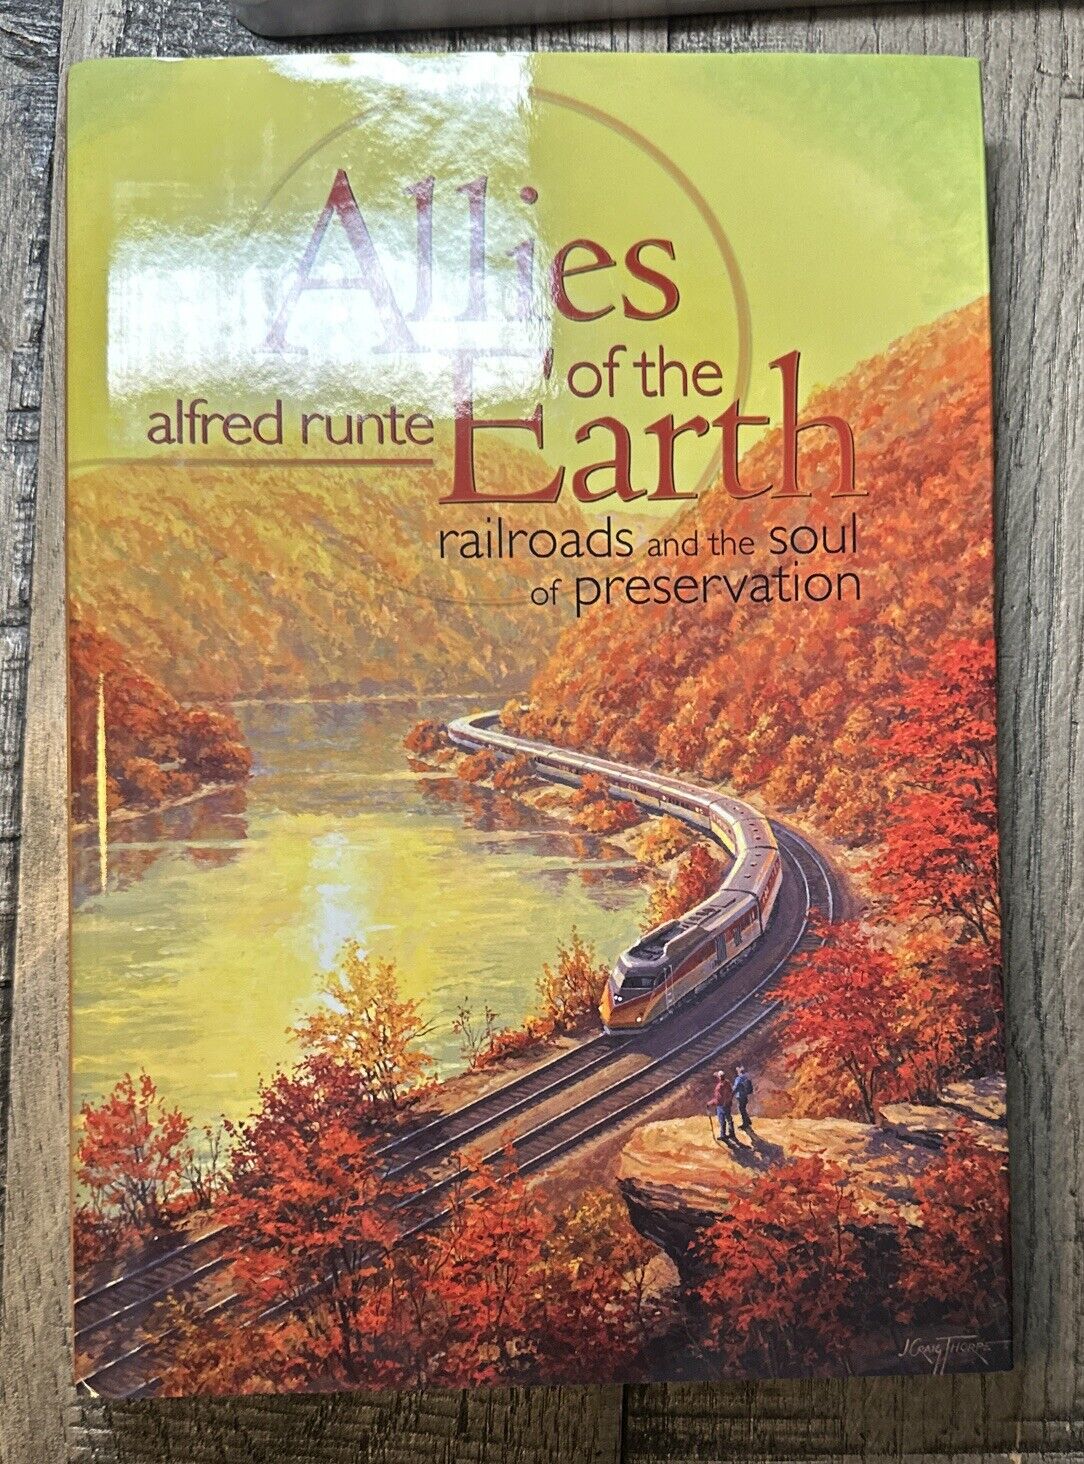 Allies of the Earth: Railroads And the Soul of Preservation by Alfred Runte HC